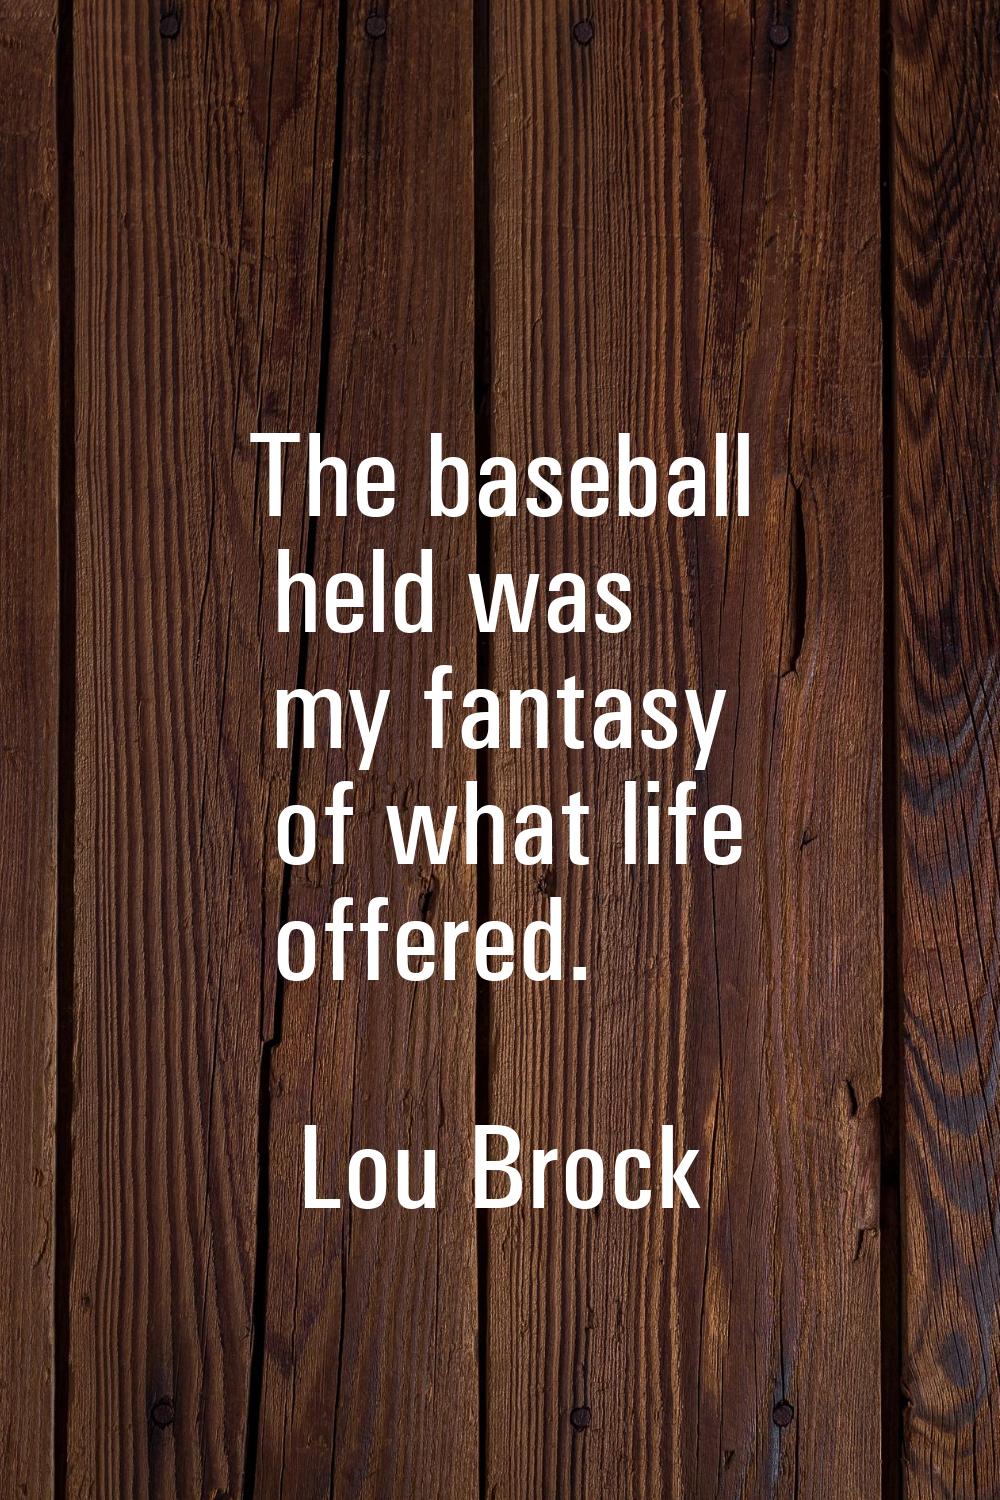 The baseball held was my fantasy of what life offered.